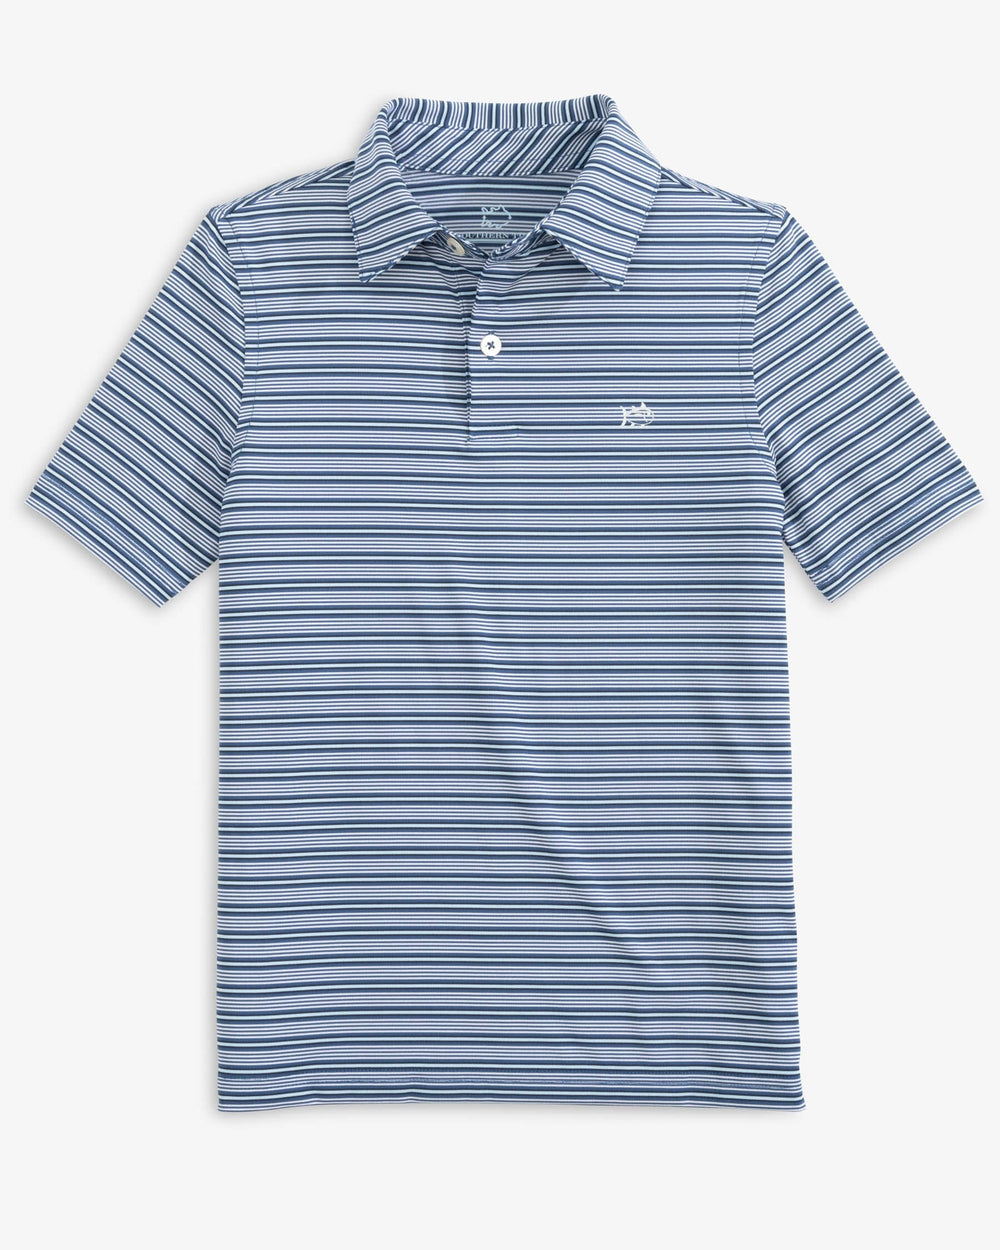 The front view of the Southern Tide Boys Driver Crawford Stripe Performance Polo Shirt by Southern Tide - Aged Denim